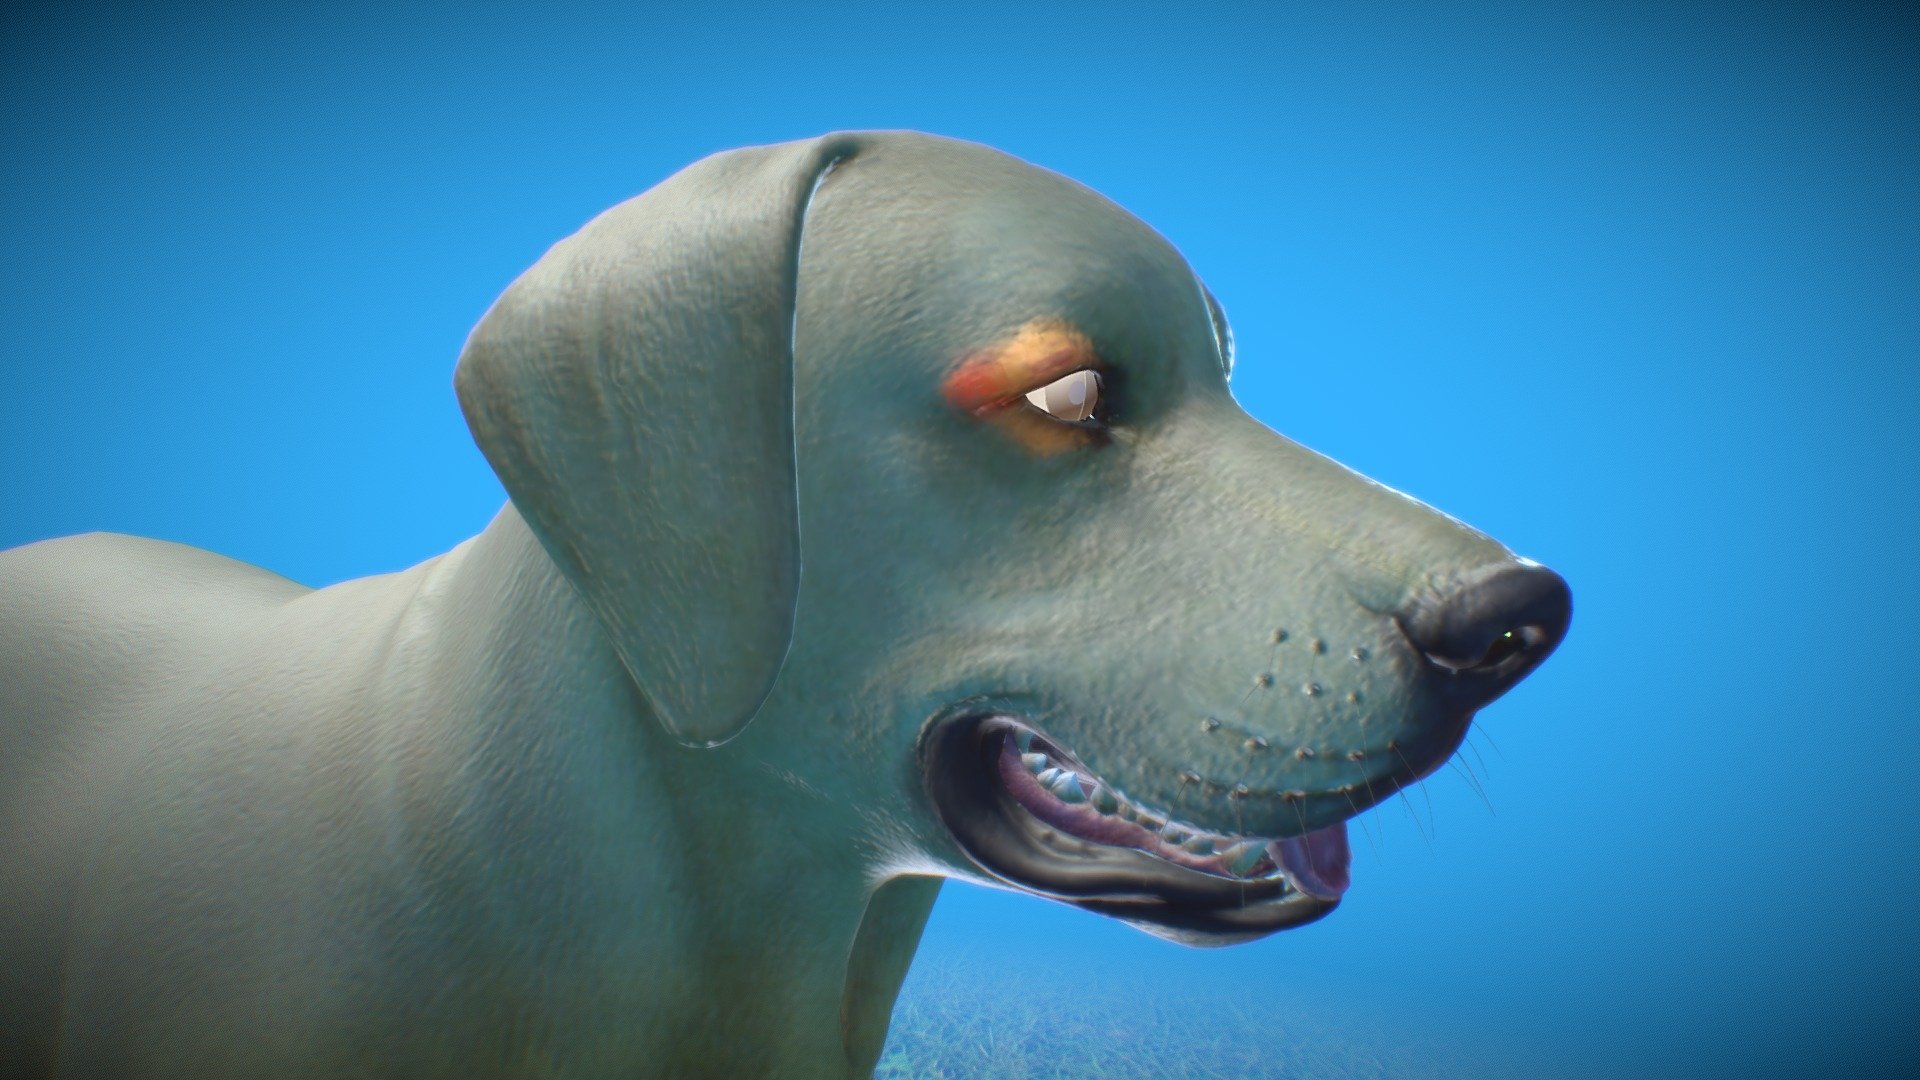 Investigation about the dog´s eye anatomy 3d model